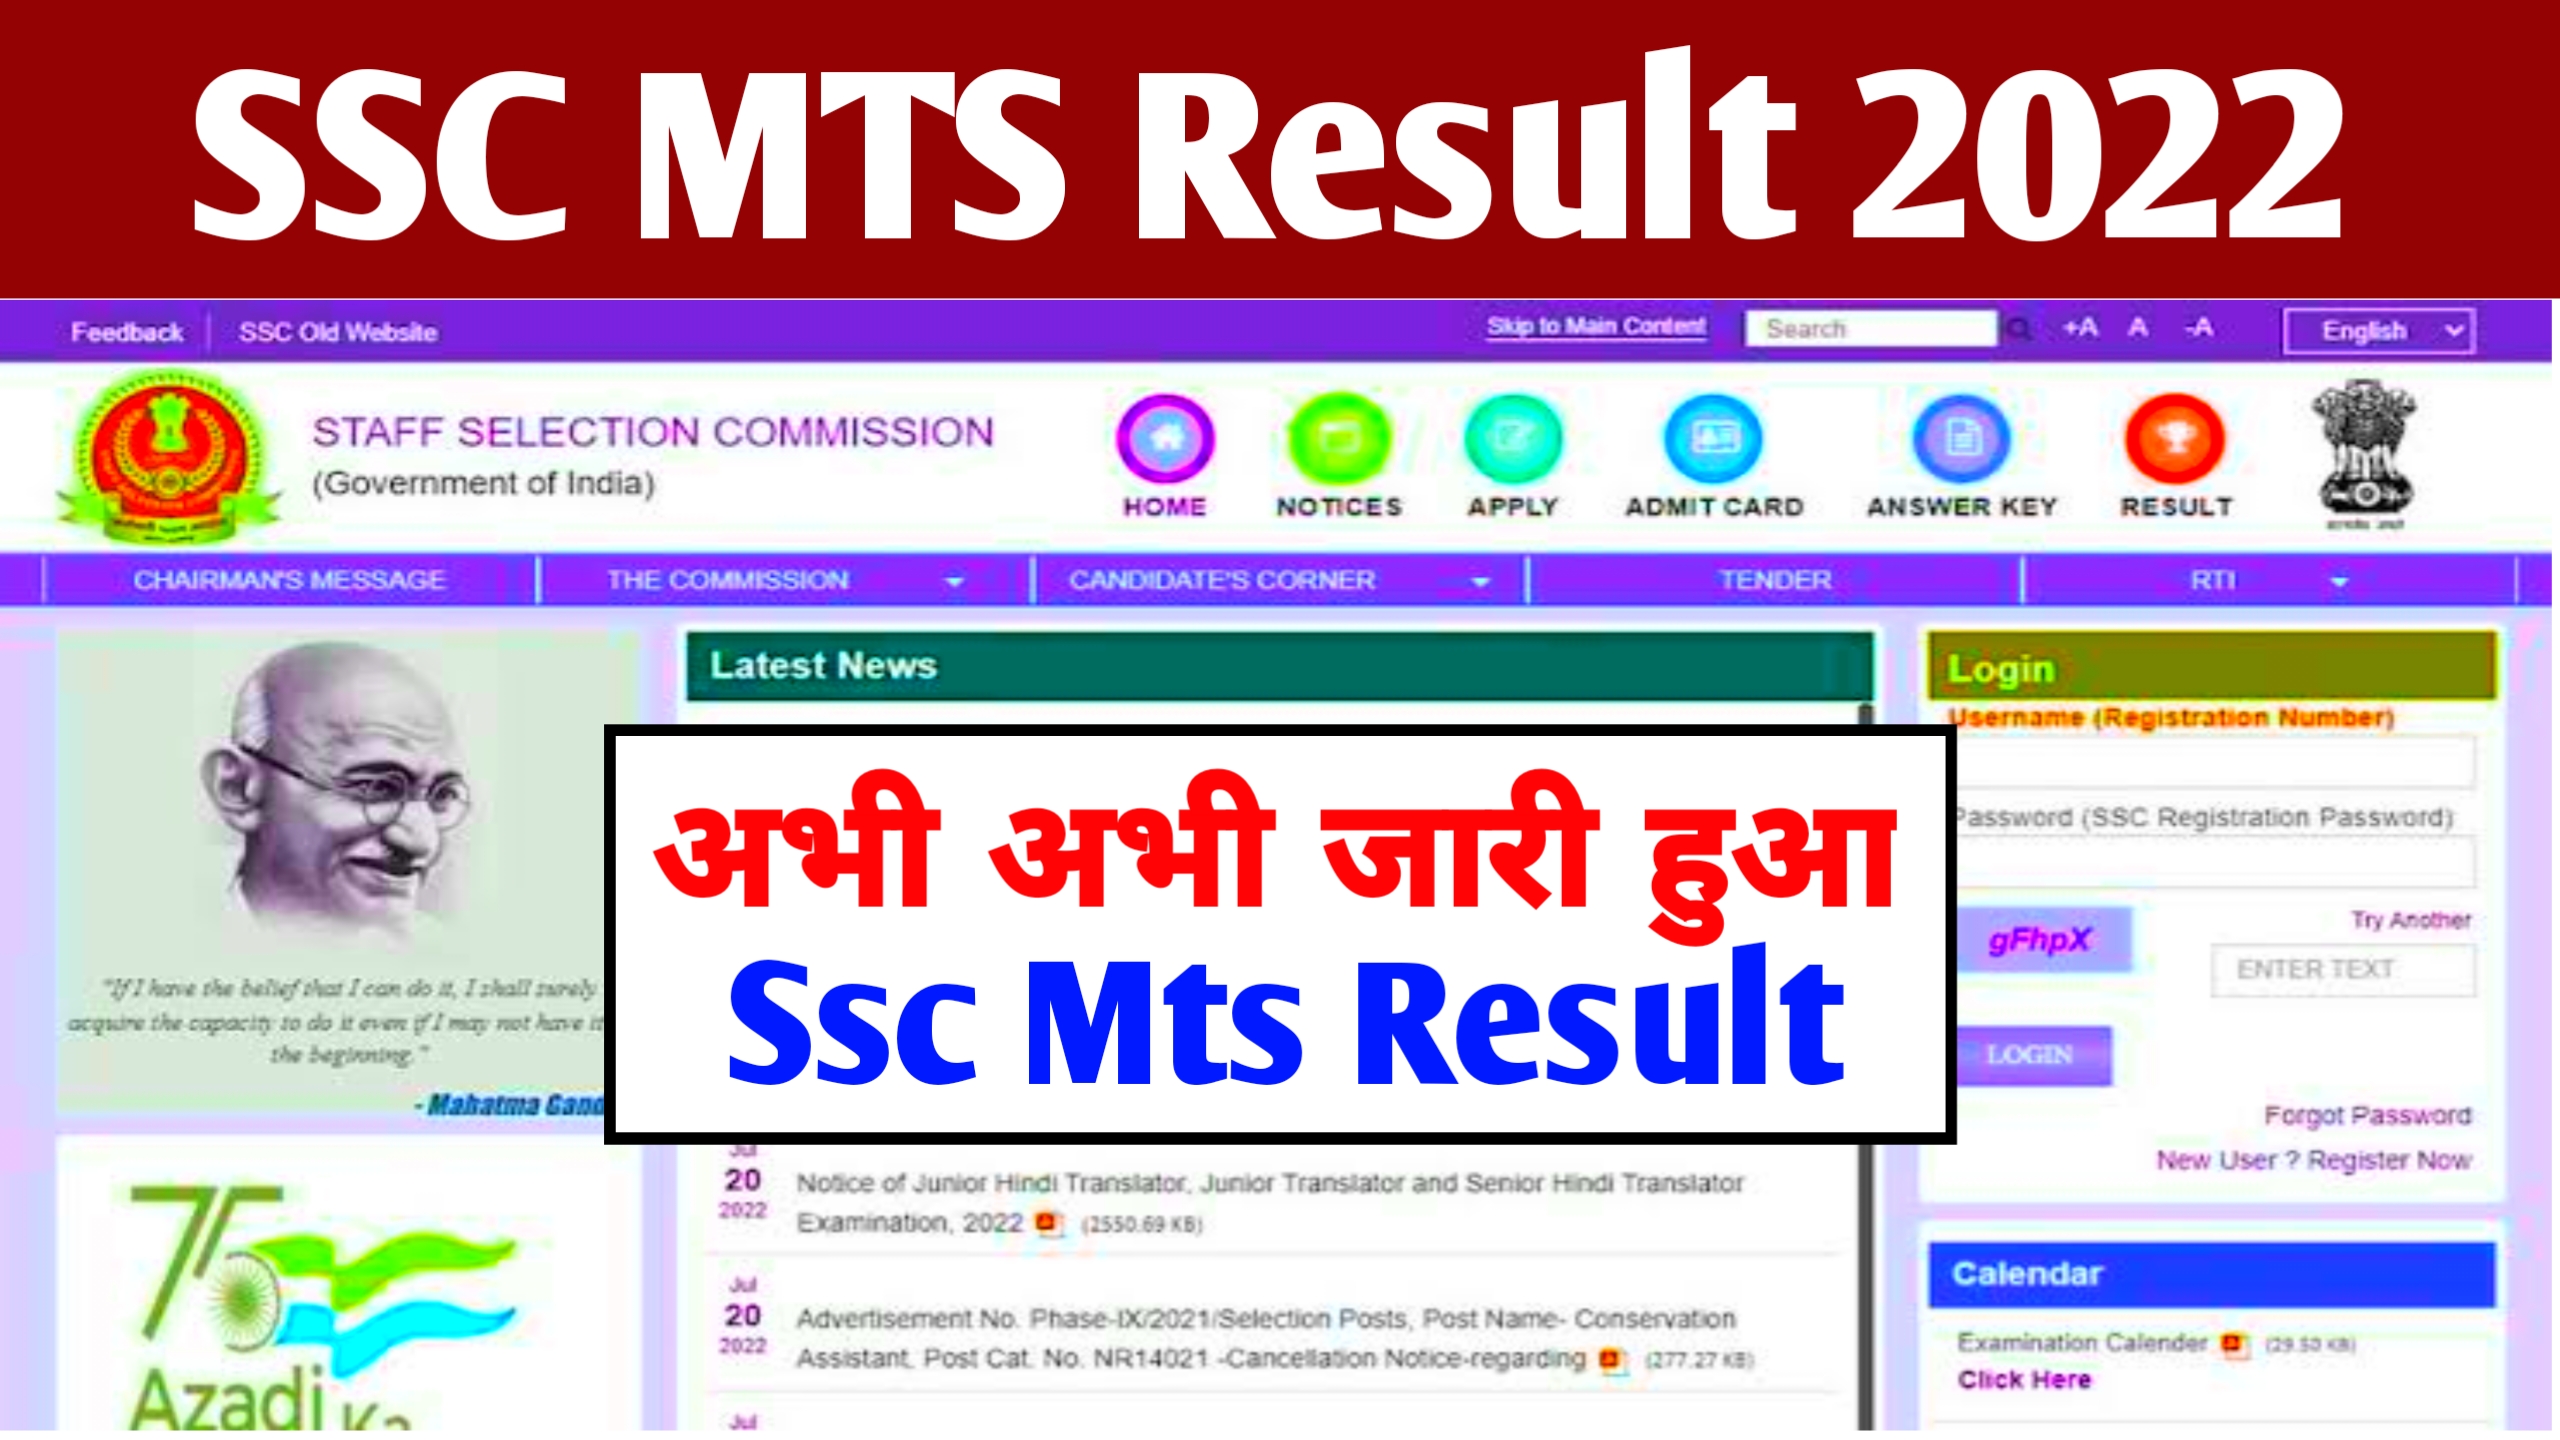 Download Ssc Mts Result 2022 @ssc.nic.in ~ Merit List Released ,Cut Off